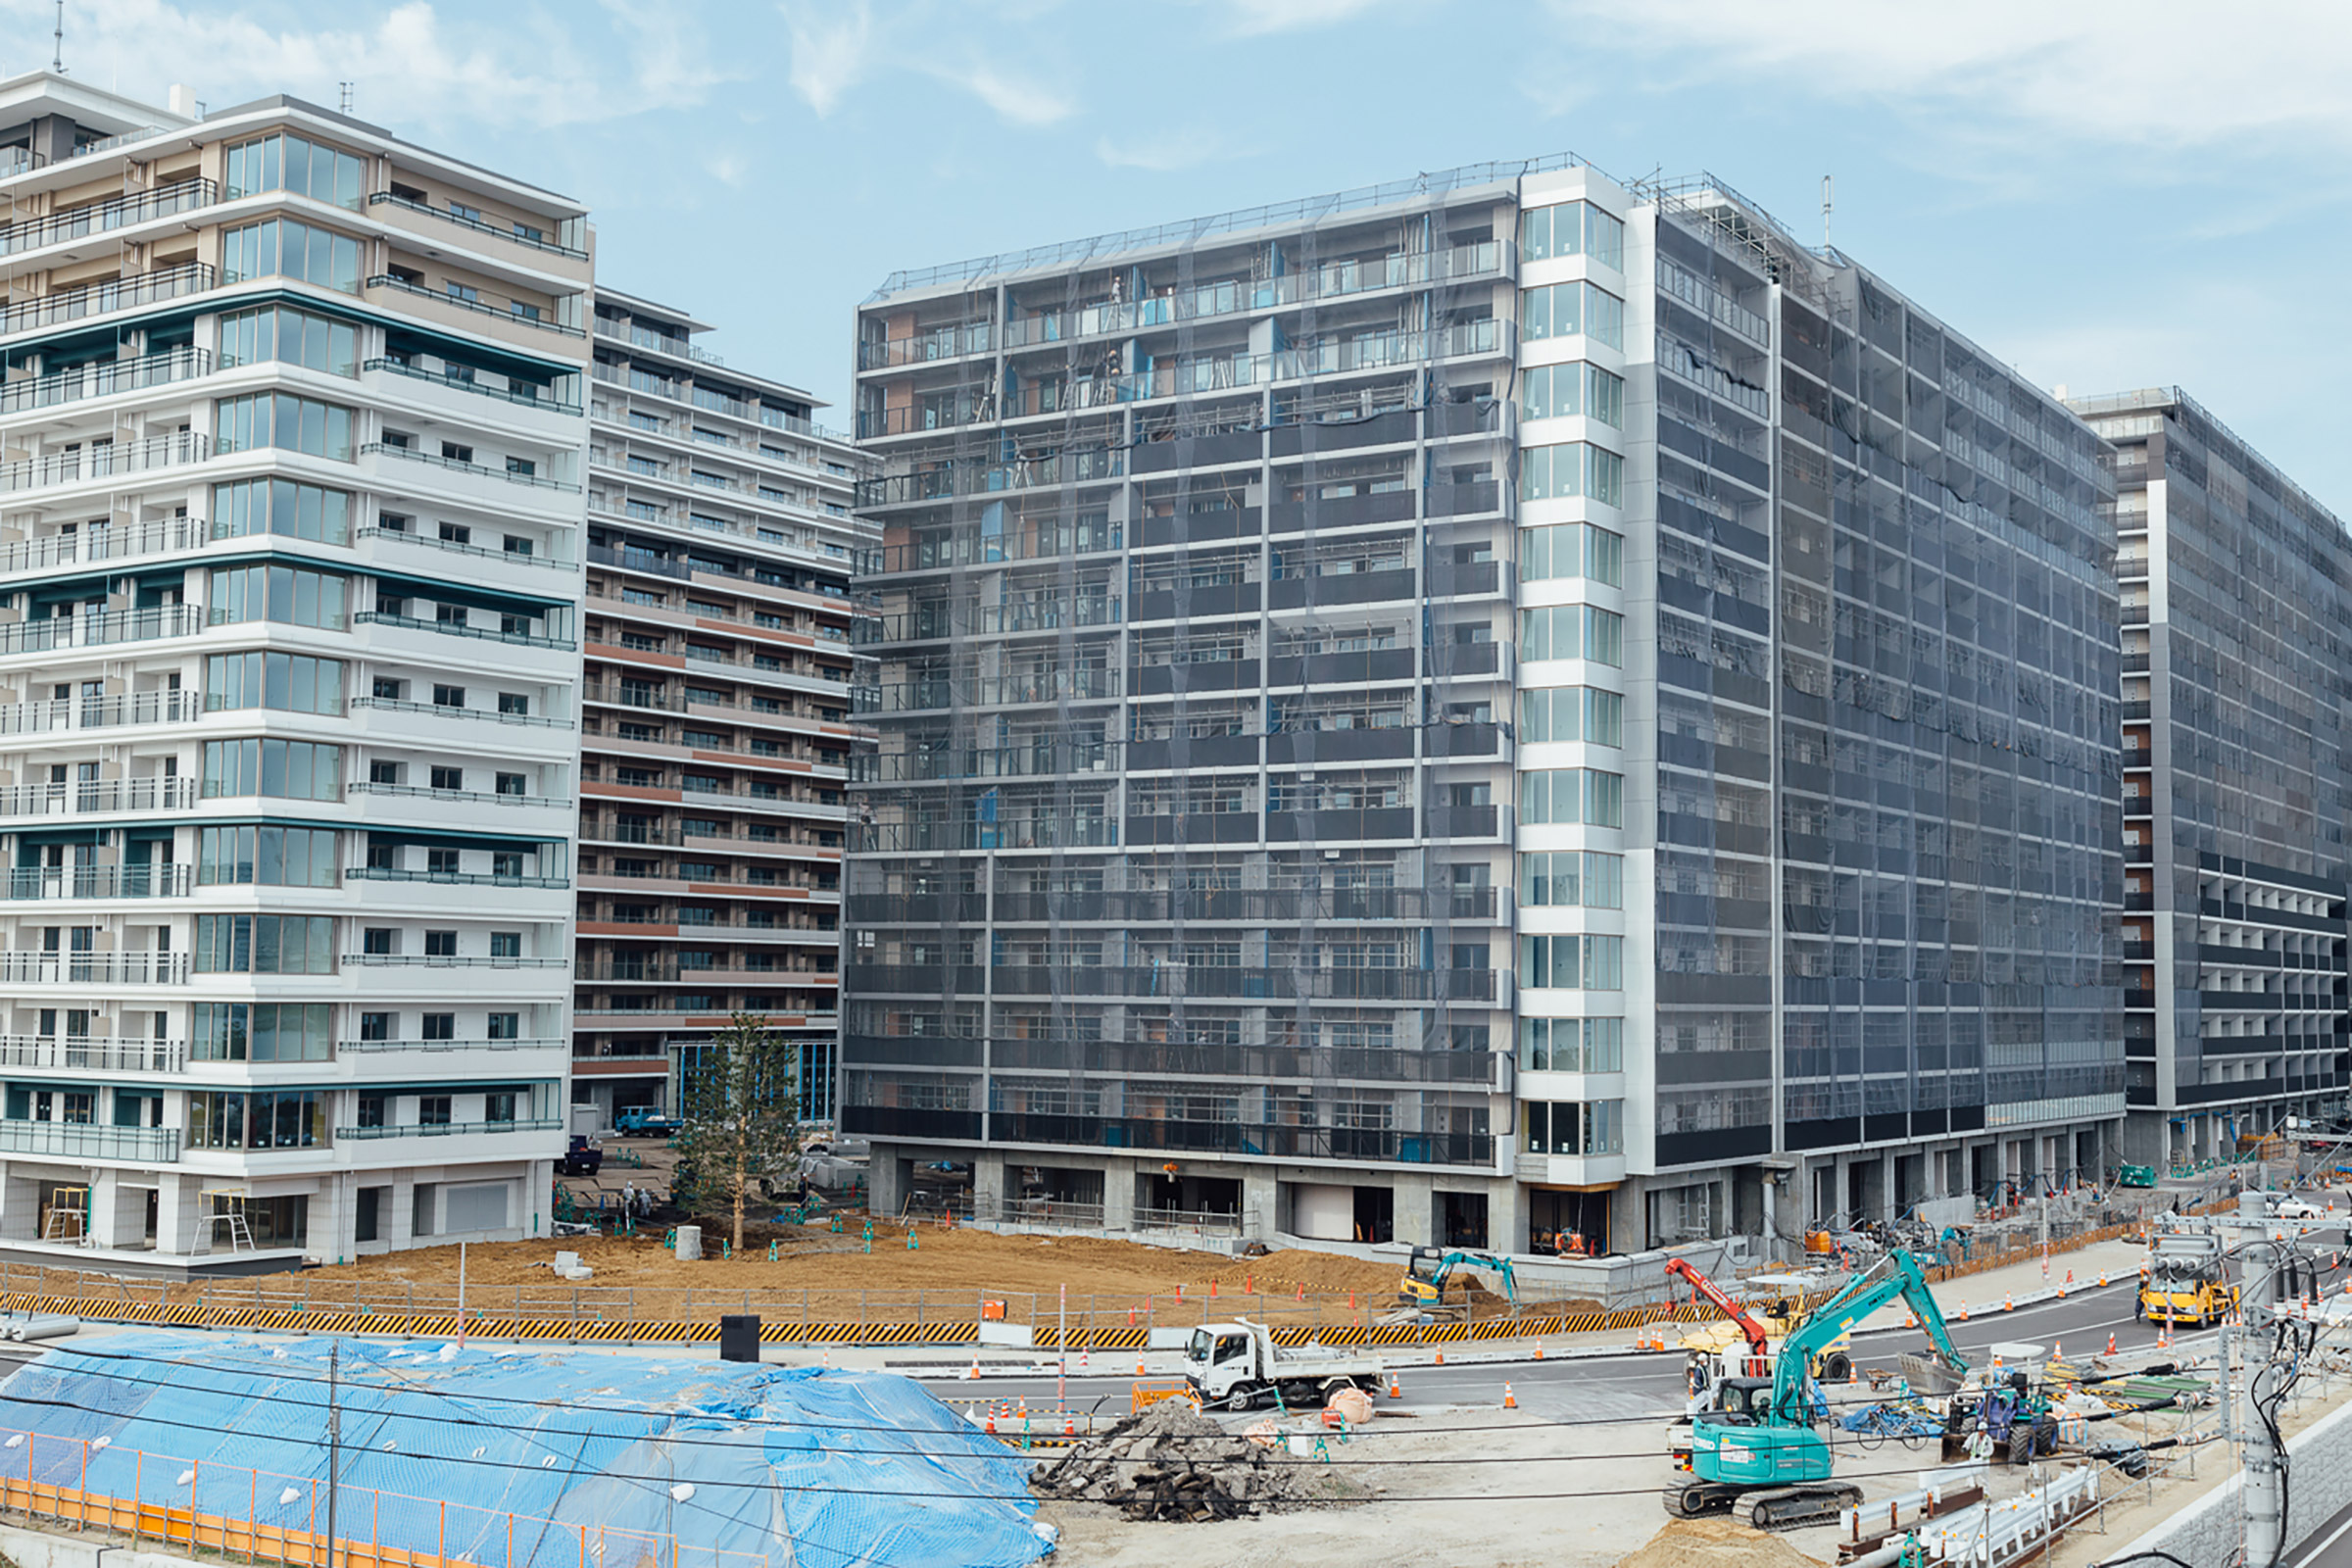 The athletes’ Olympic Village taking shape, in September 2019 (Kenji Chiga for TIME)